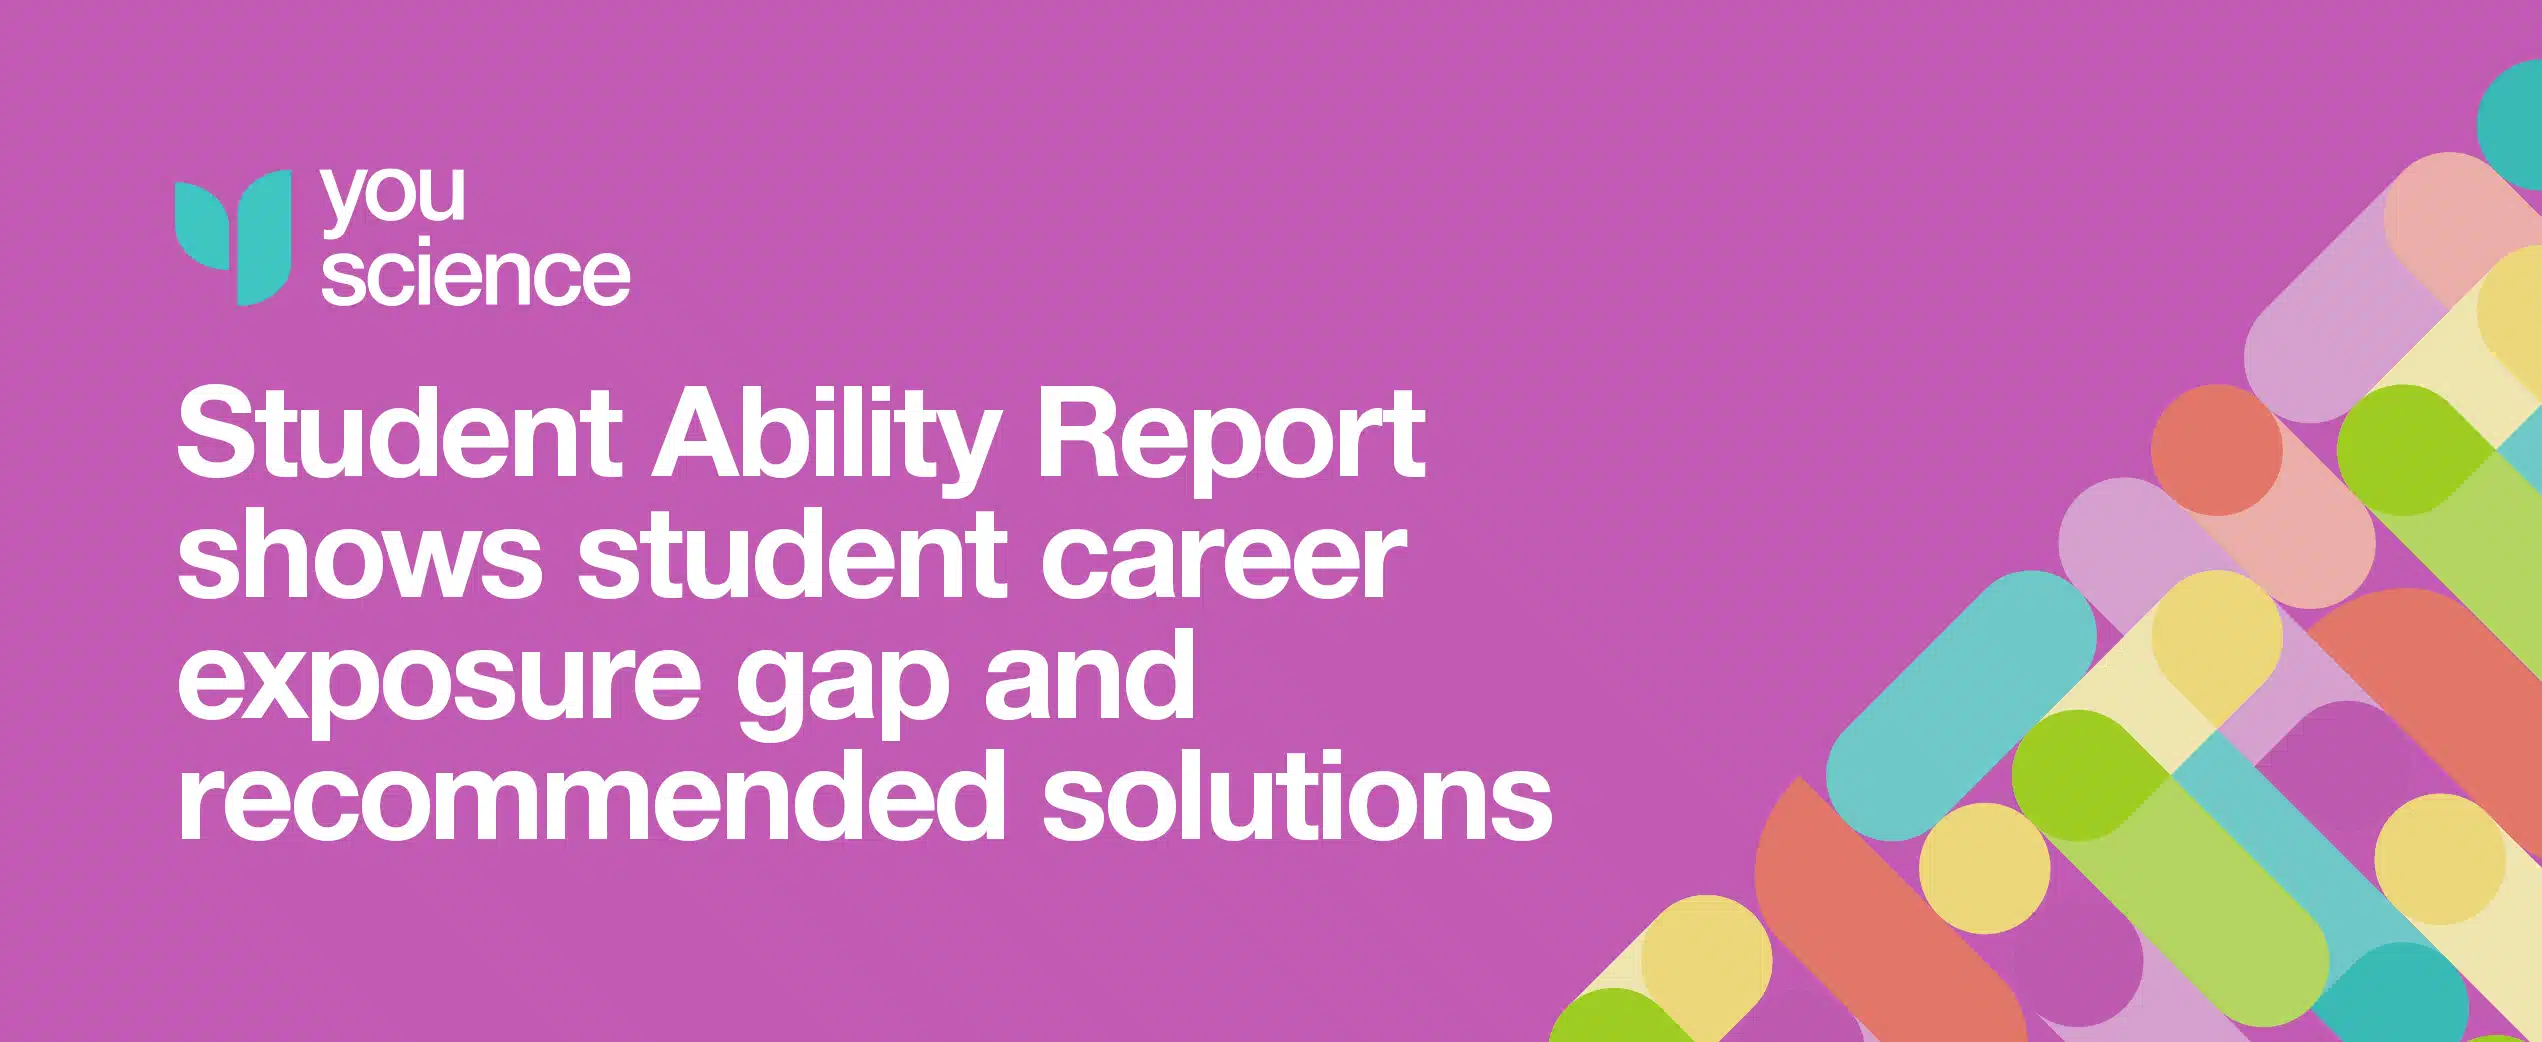 Student Ability Report shows student career exposure gap and recommended solutions